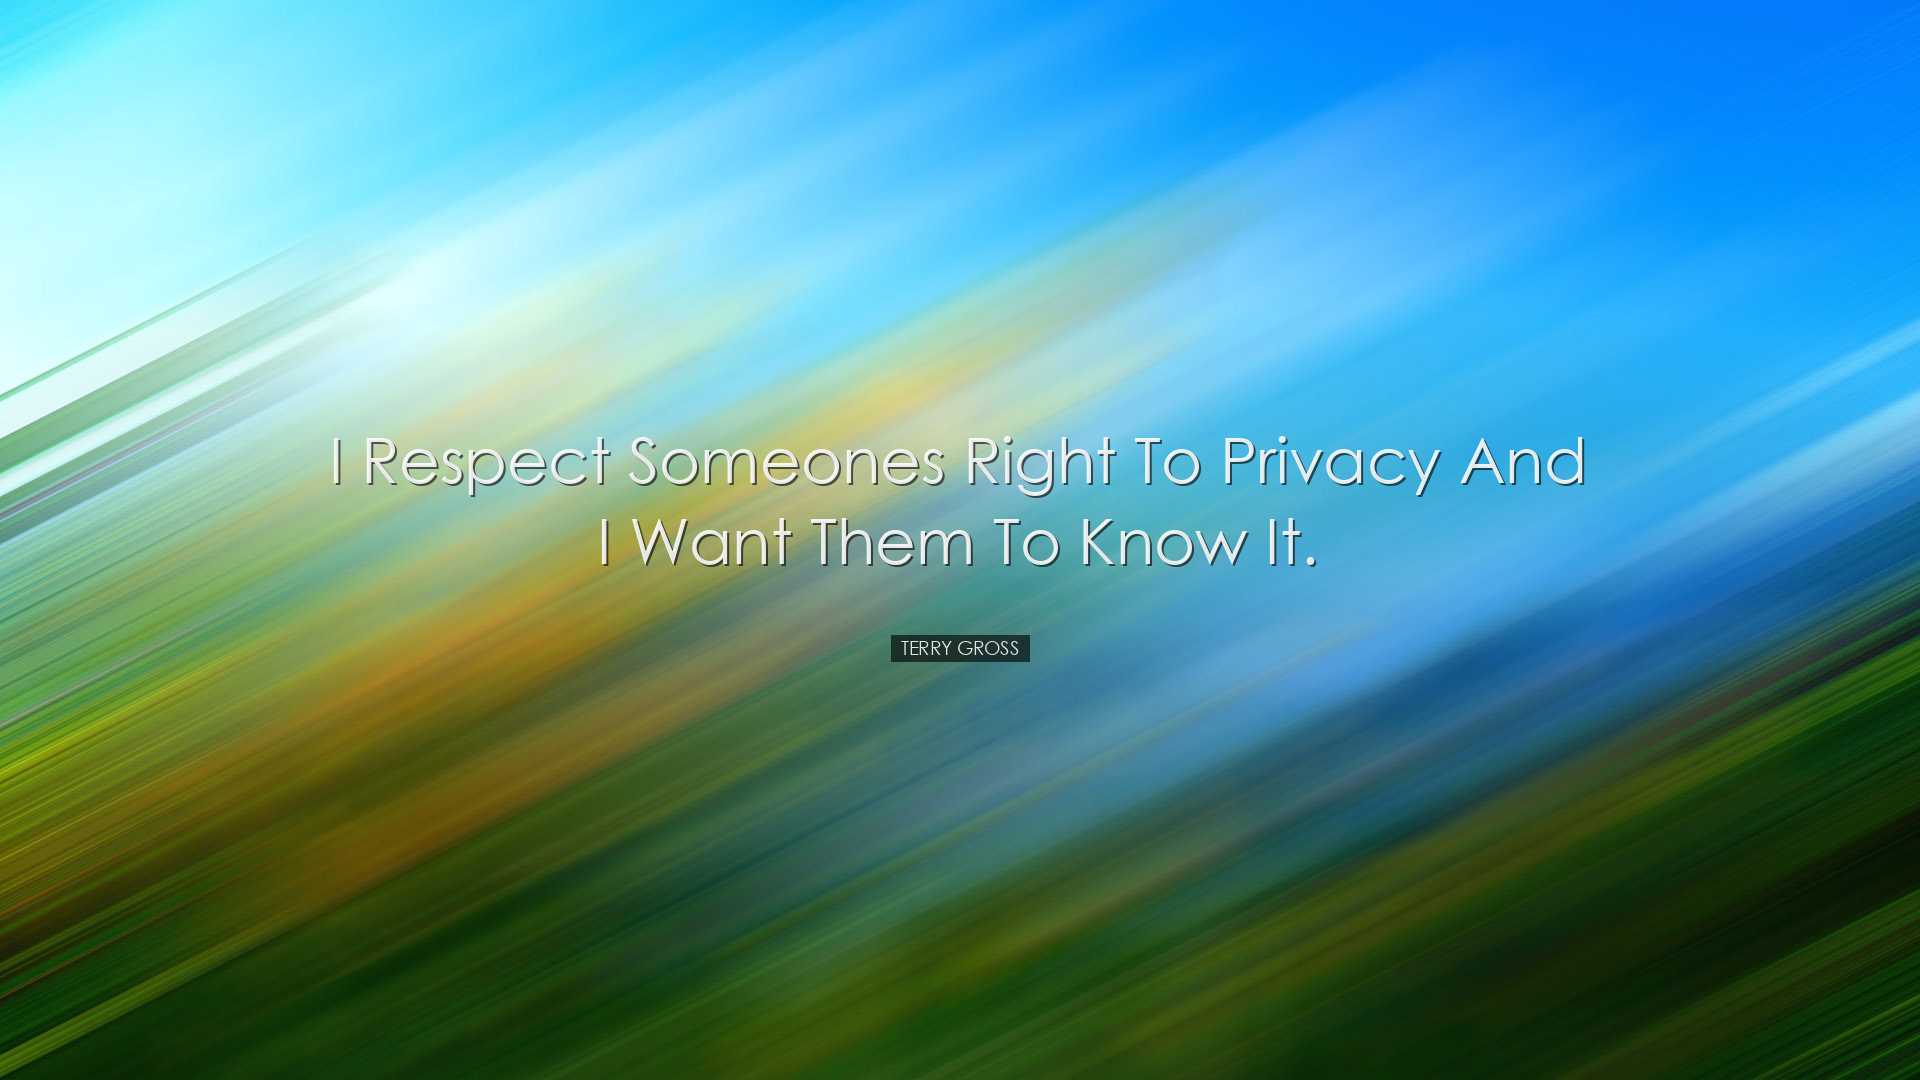 I respect someones right to privacy and I want them to know it. -